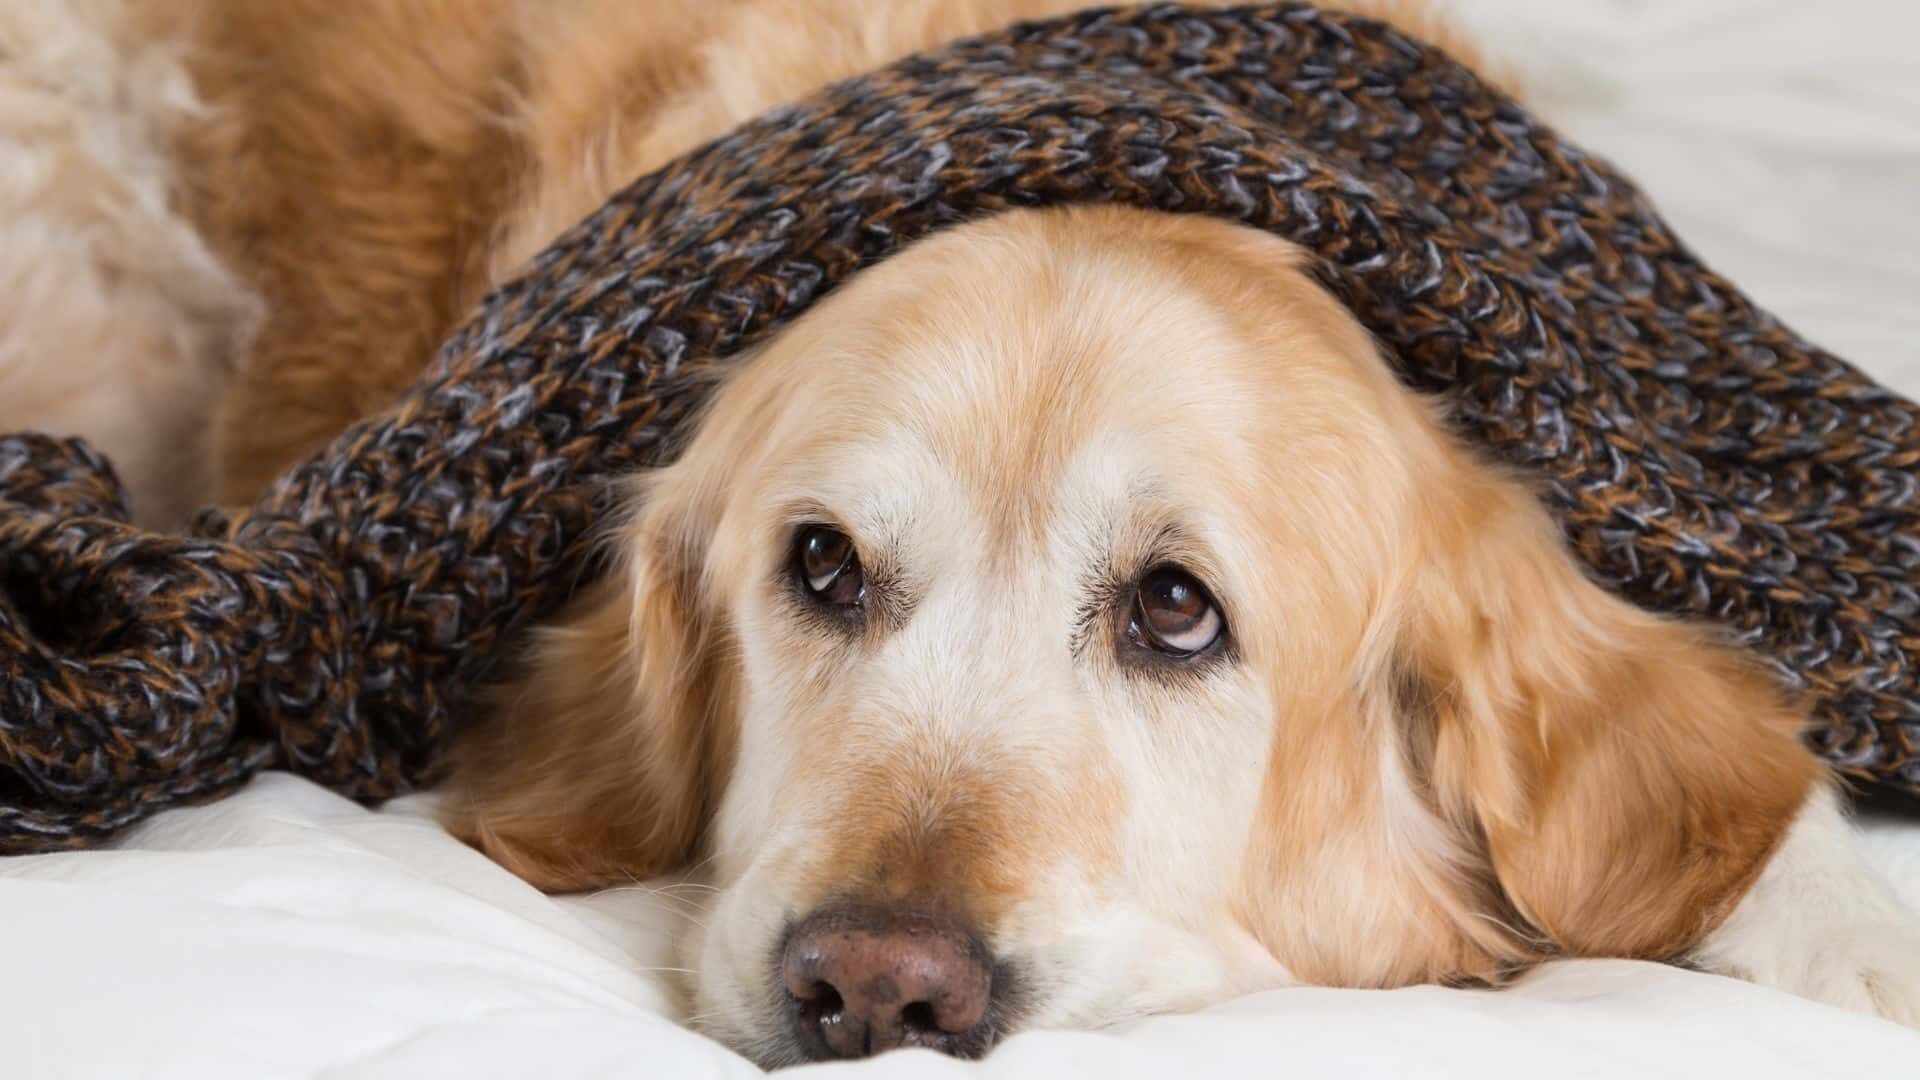 Do dogs get cold at night?